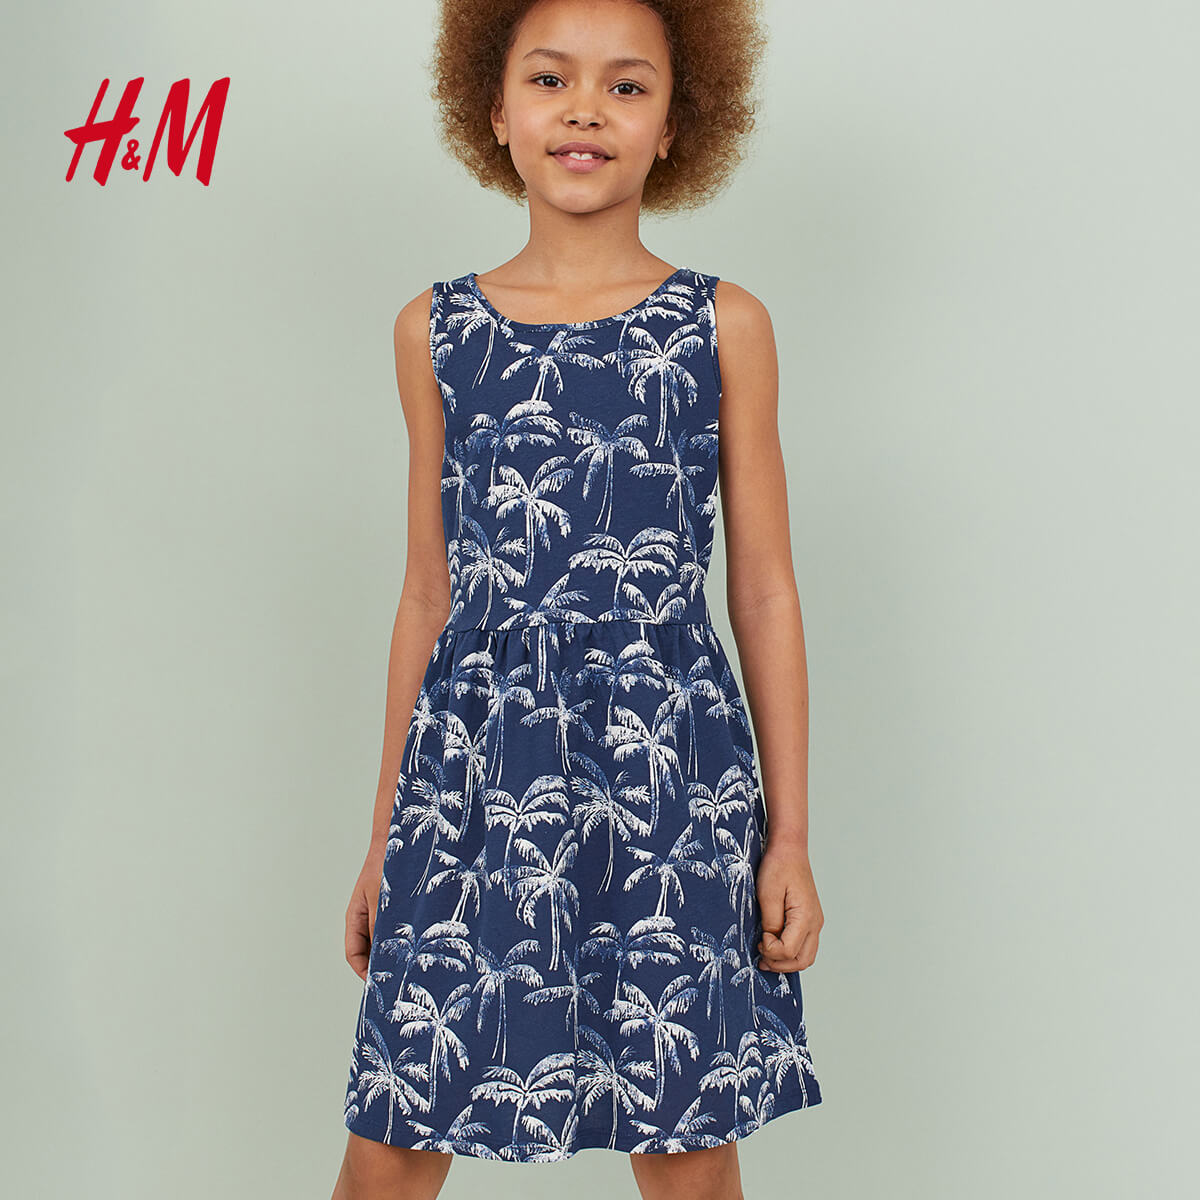 Shop for 8 years | Dresses | Kids | online at Grattan